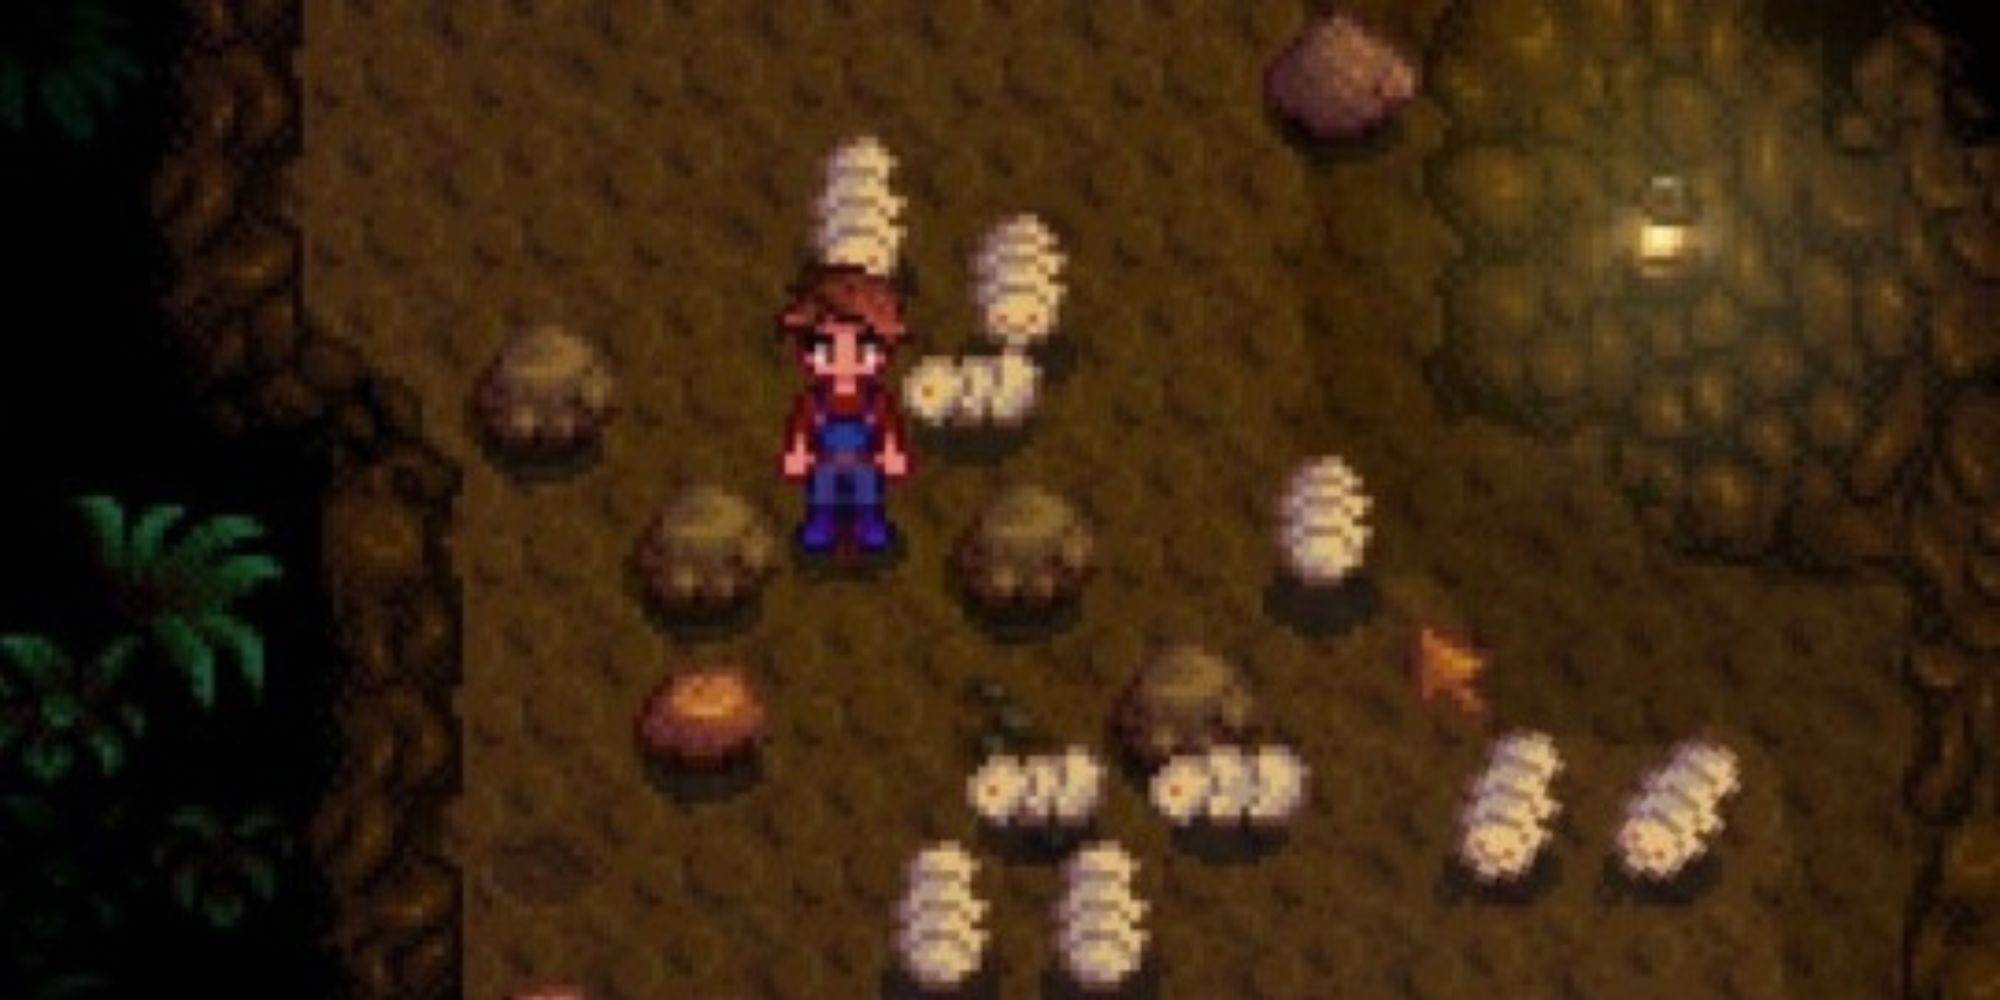 Grubs surrounding the player in the Mines